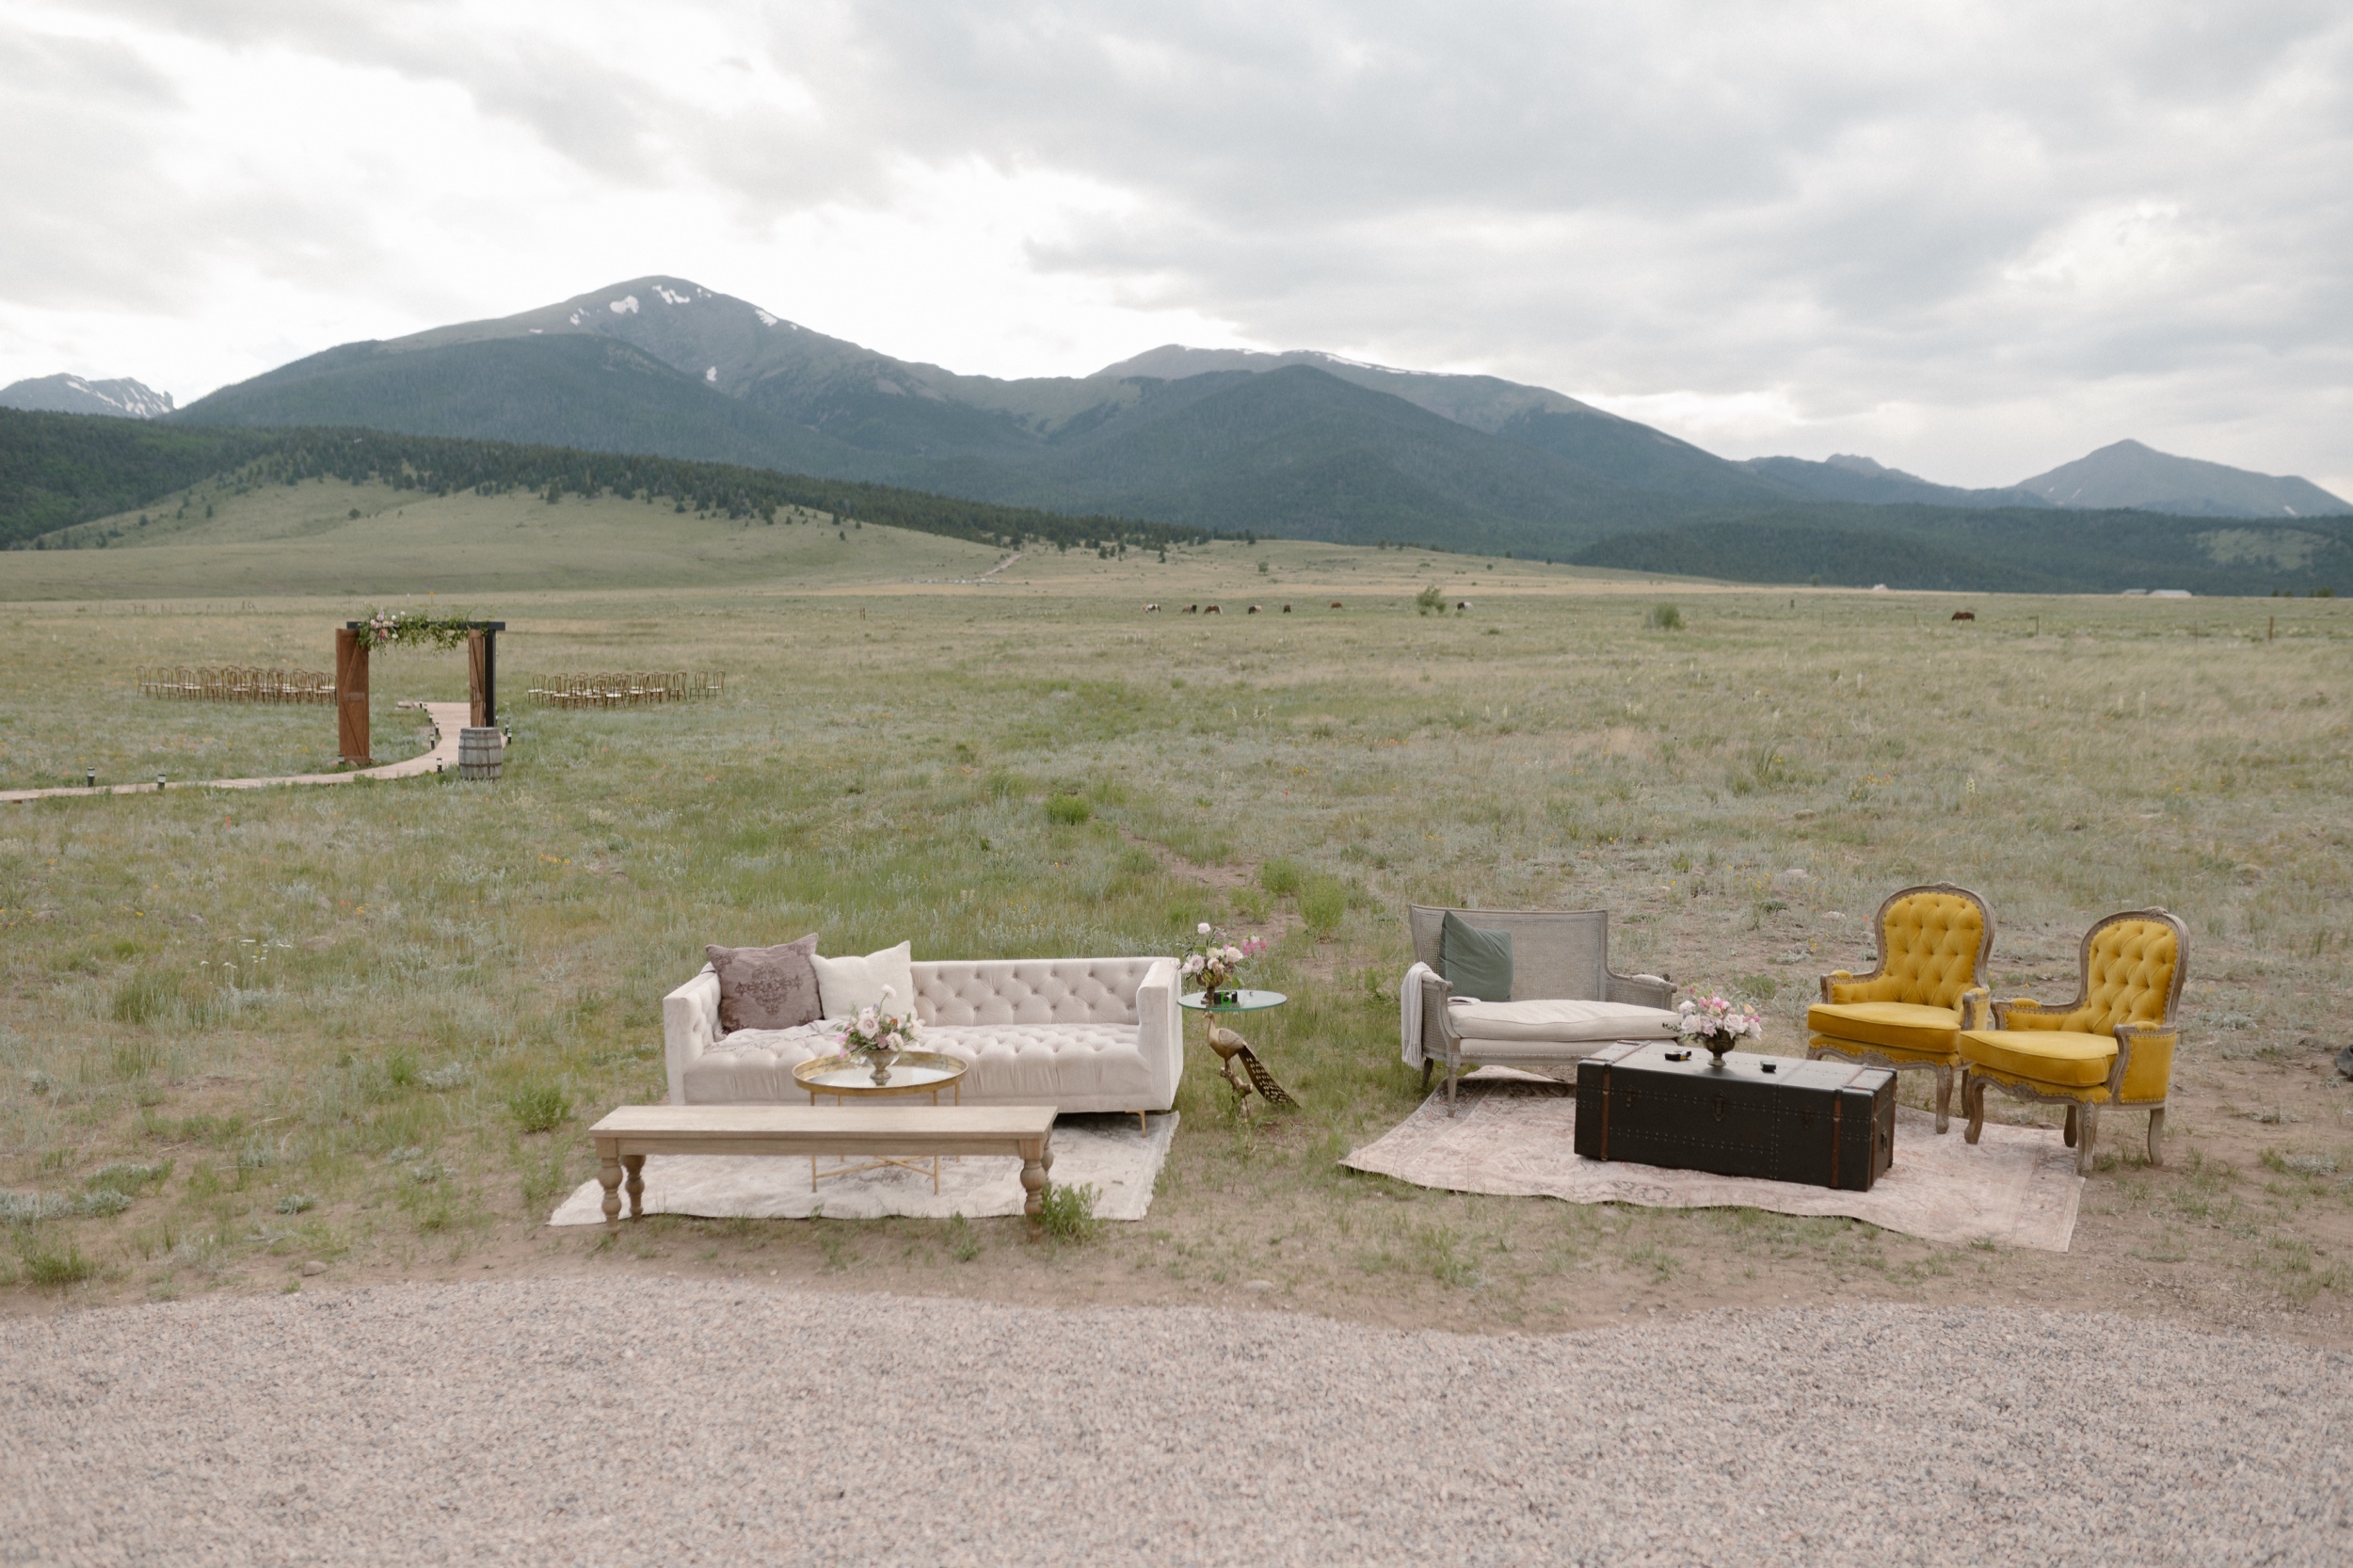 A photo of lounge decor on the grass with a minimal ceremony setup in the background with tall mountains in the far back. Photo taken at Three Peaks Ranch by Ashley Joyce.